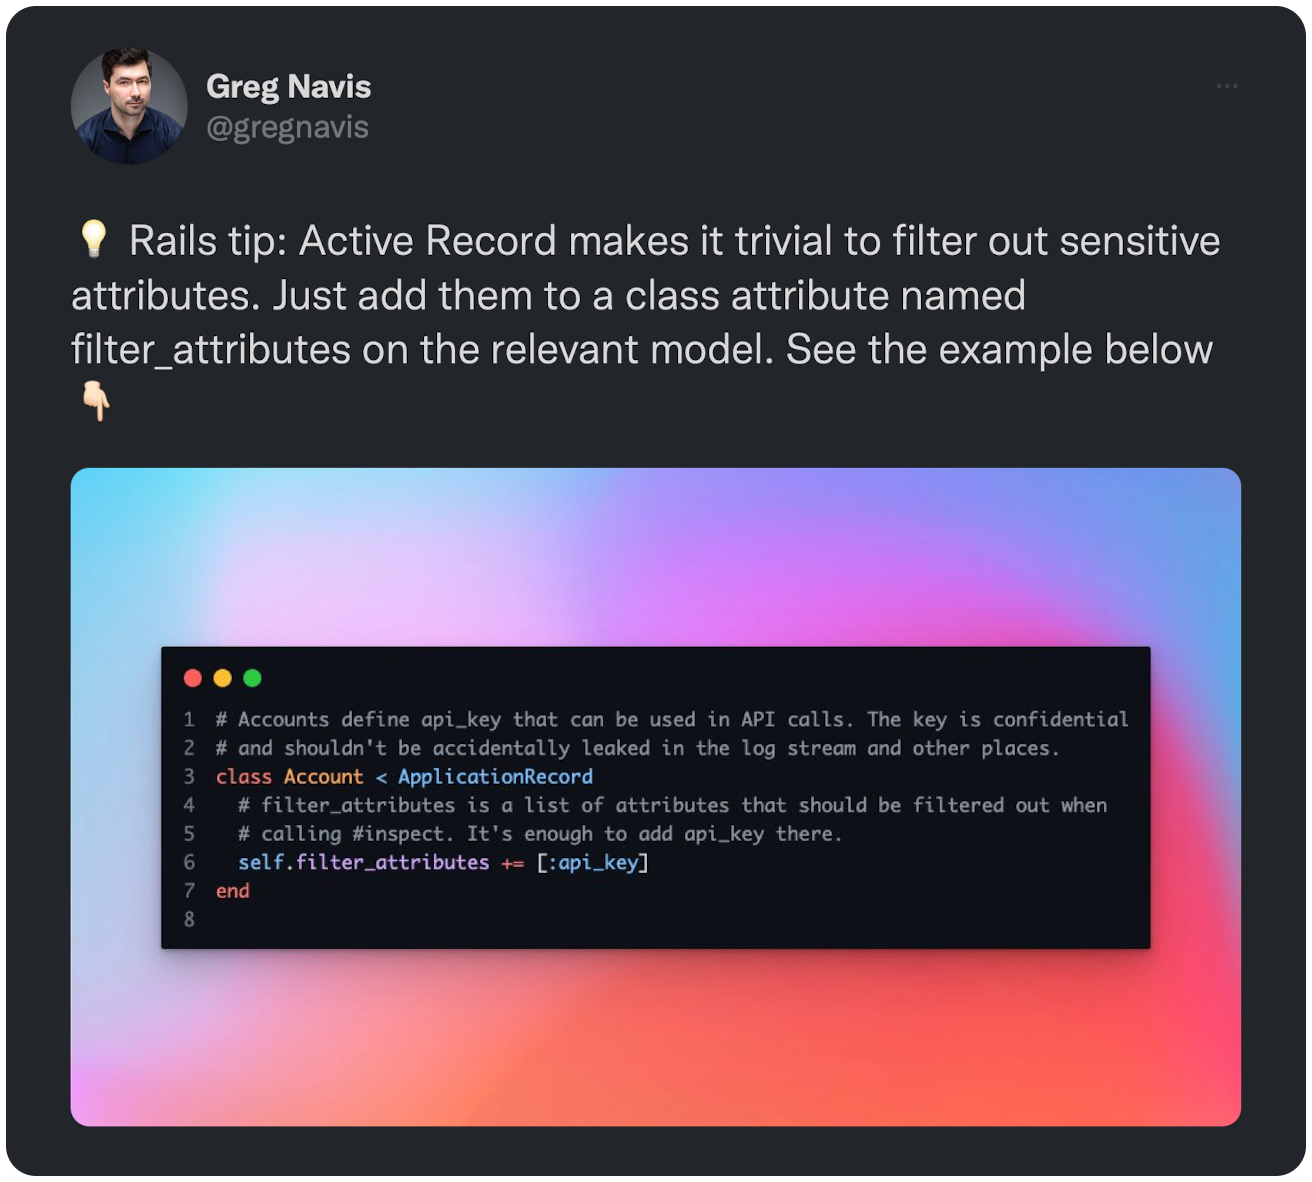  Rails tip: Active Record makes it trivial to filter out sensitive attributes. Just add them to a class attribute named filter_attributes on the relevant model. See the example below 👇🏻